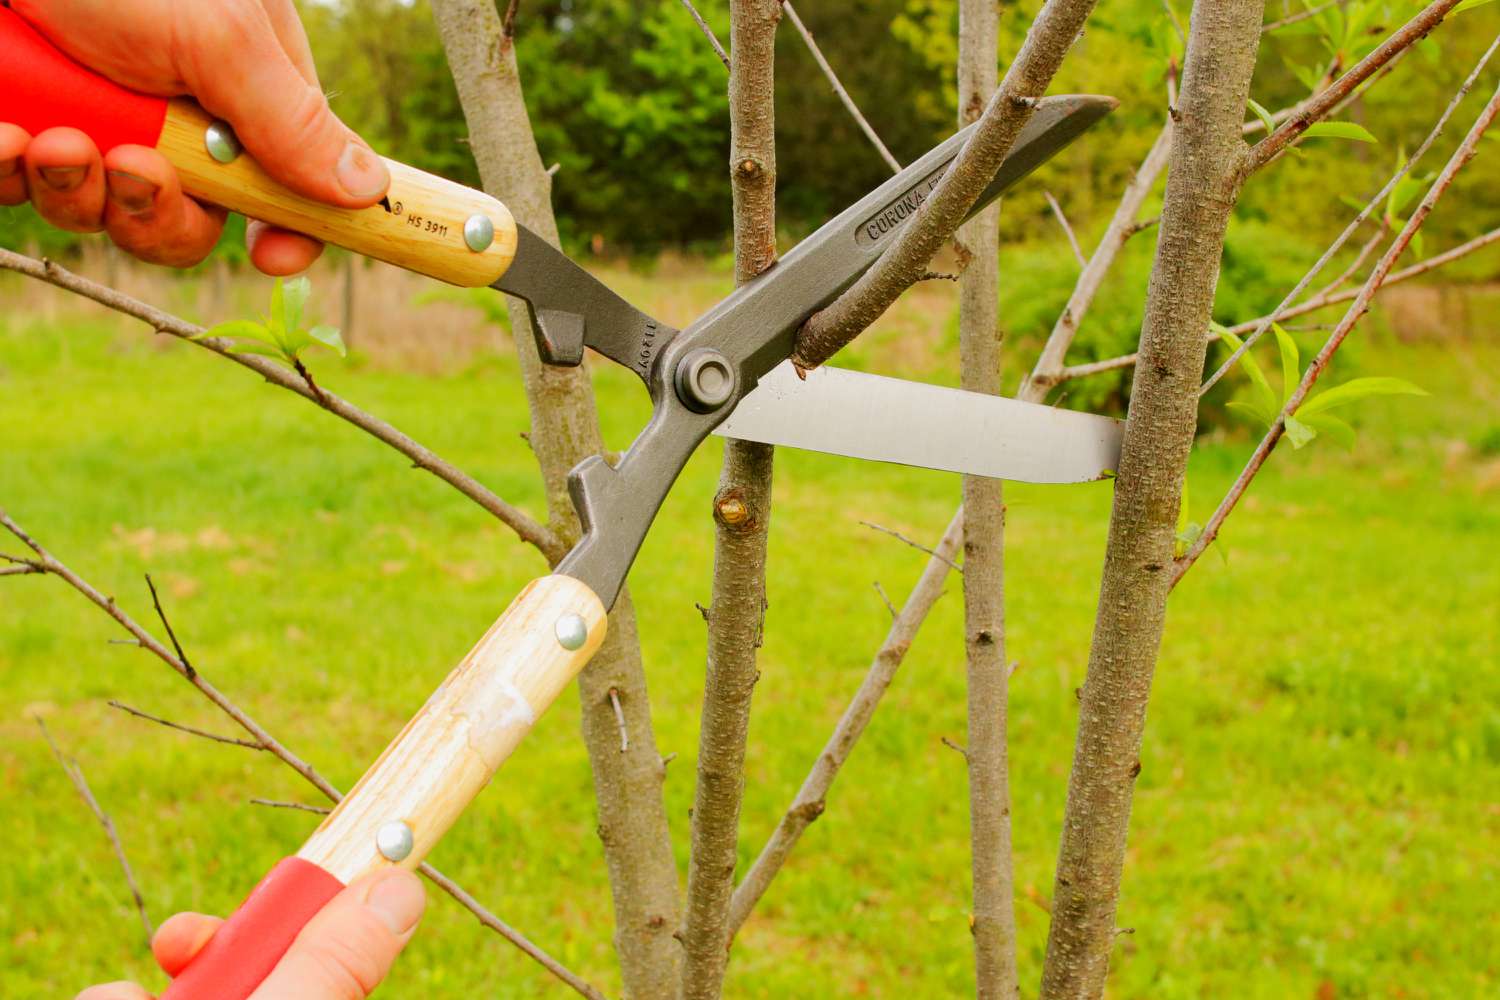 Peach tree branch cut with bypass shear to promote new growth